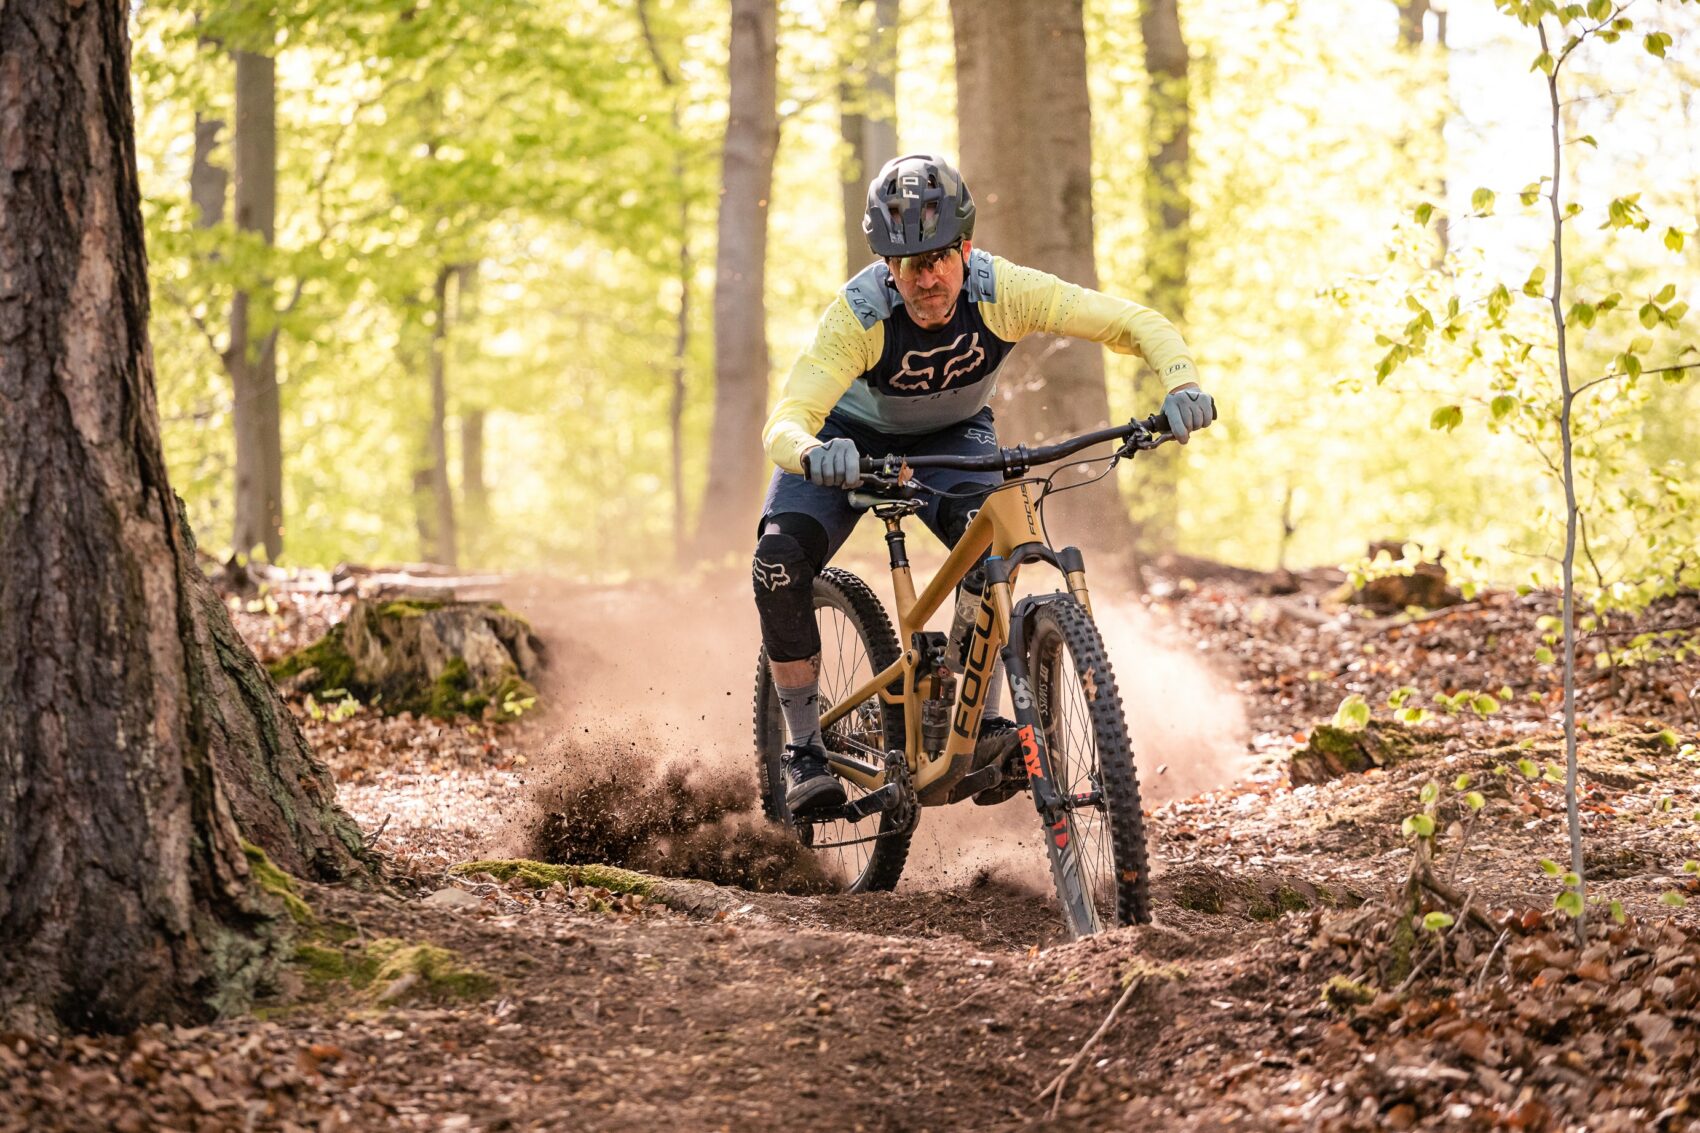 How to get started with Mountain Biking